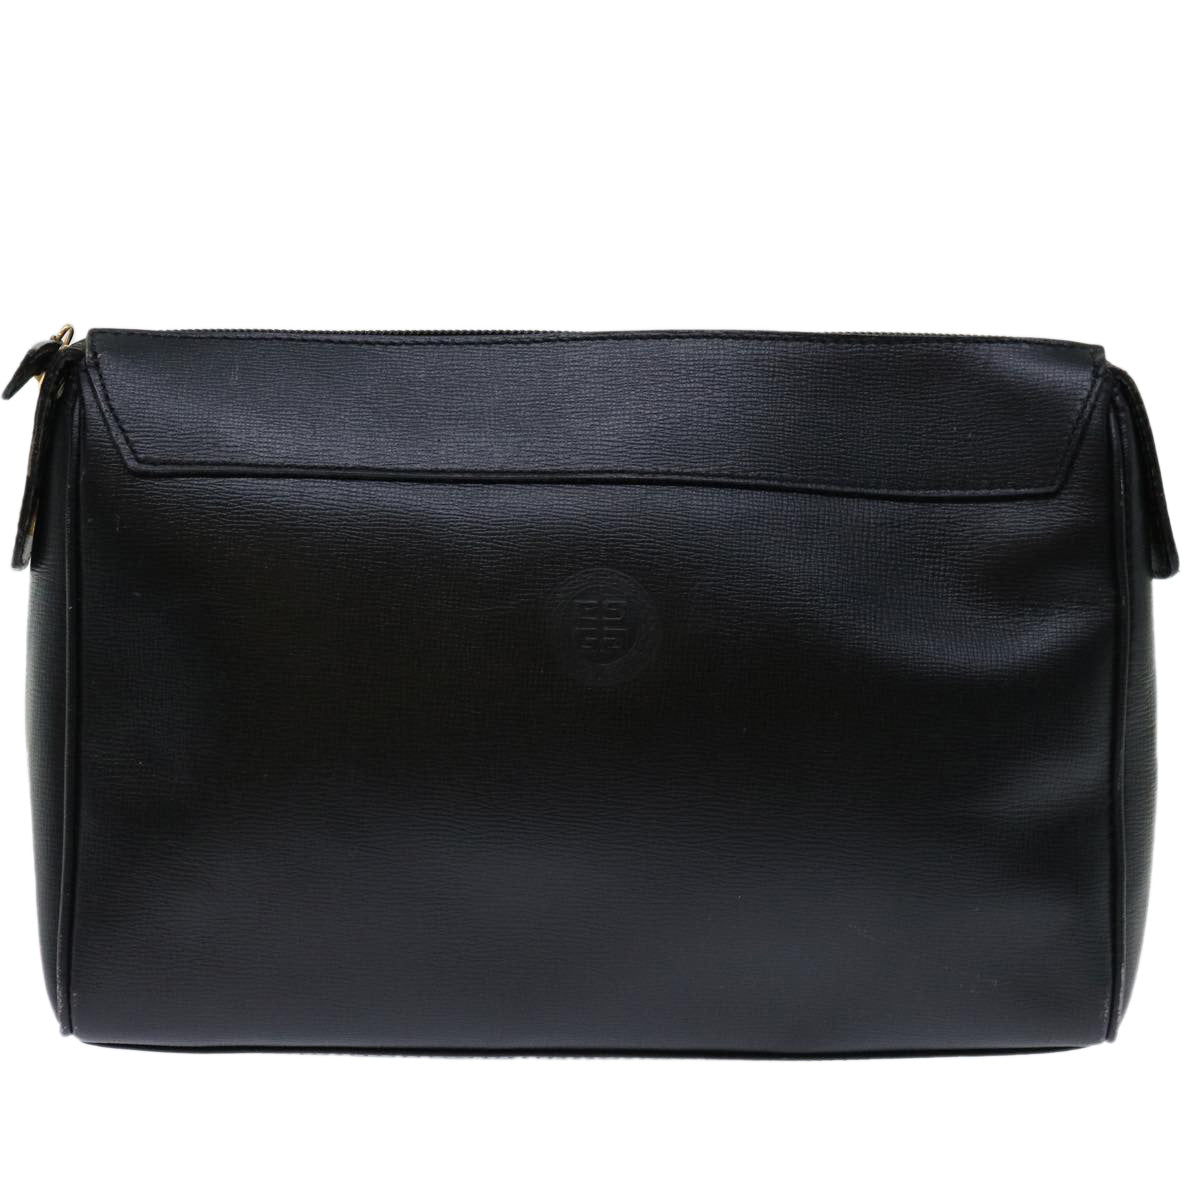 GIVENCHY Clutch Bag Leather Black Auth bs12942